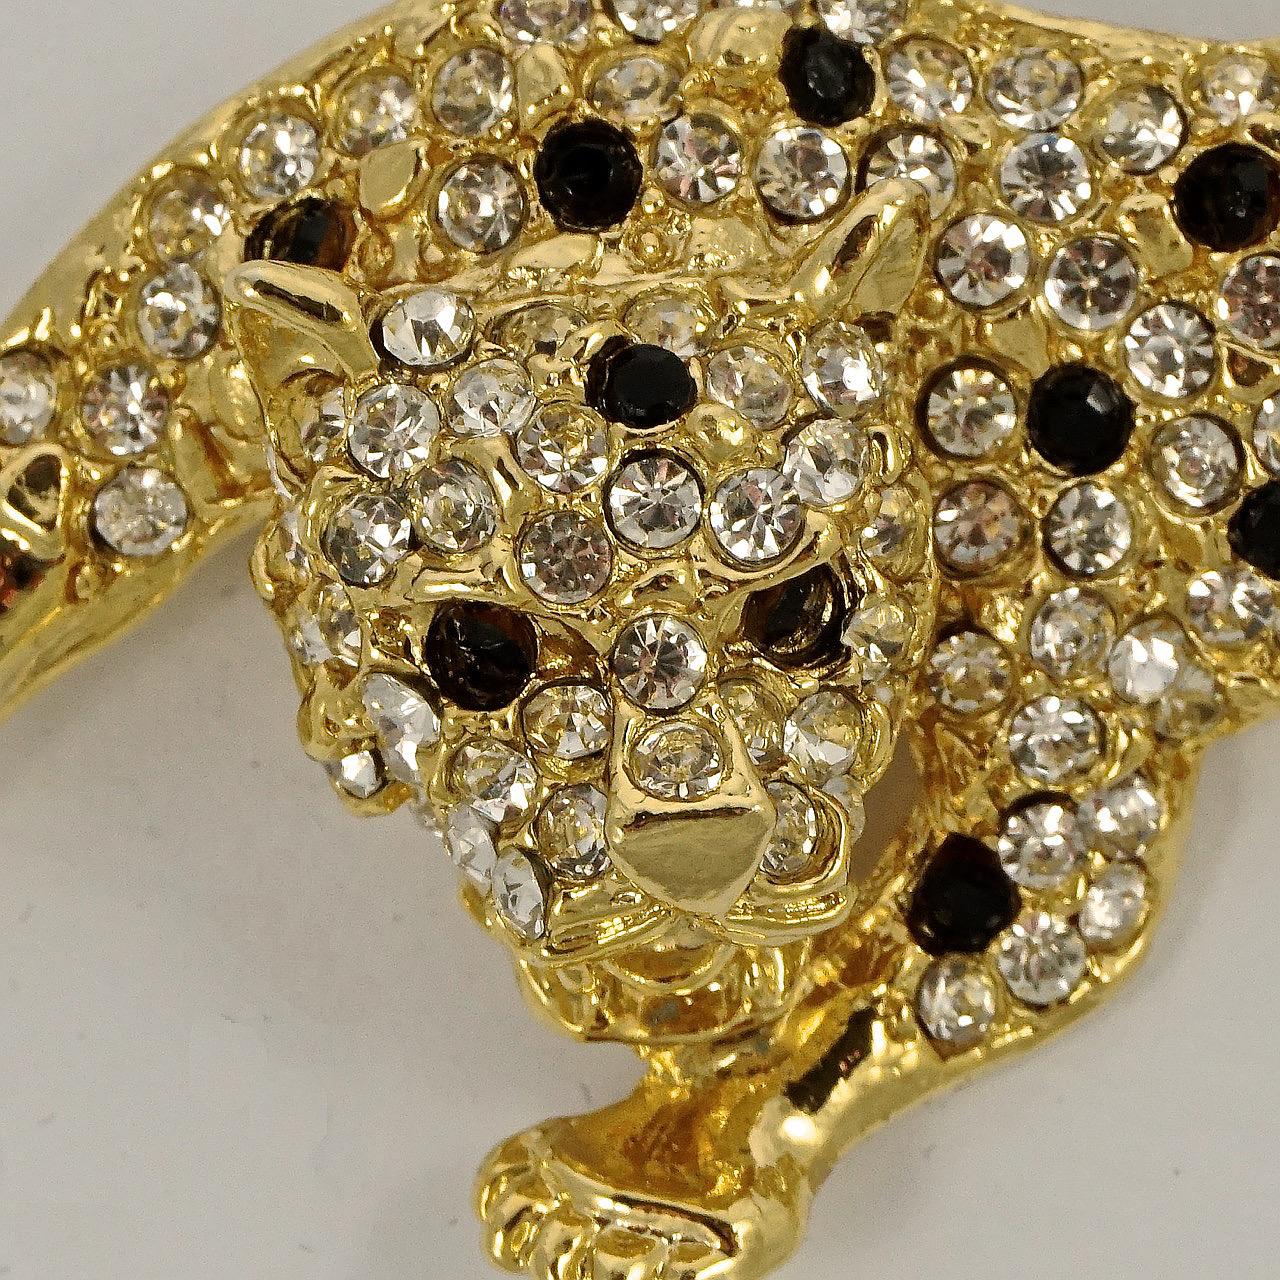 Stylish gold plated leopard brooch, featuring faceted black and clear rhinestones. Measuring length 6.8cm / 2.67 inches by width 3.3cm / 1.3 inches. The brooch is in very good condition.

This beautiful leopard brooch is circa 1980s.